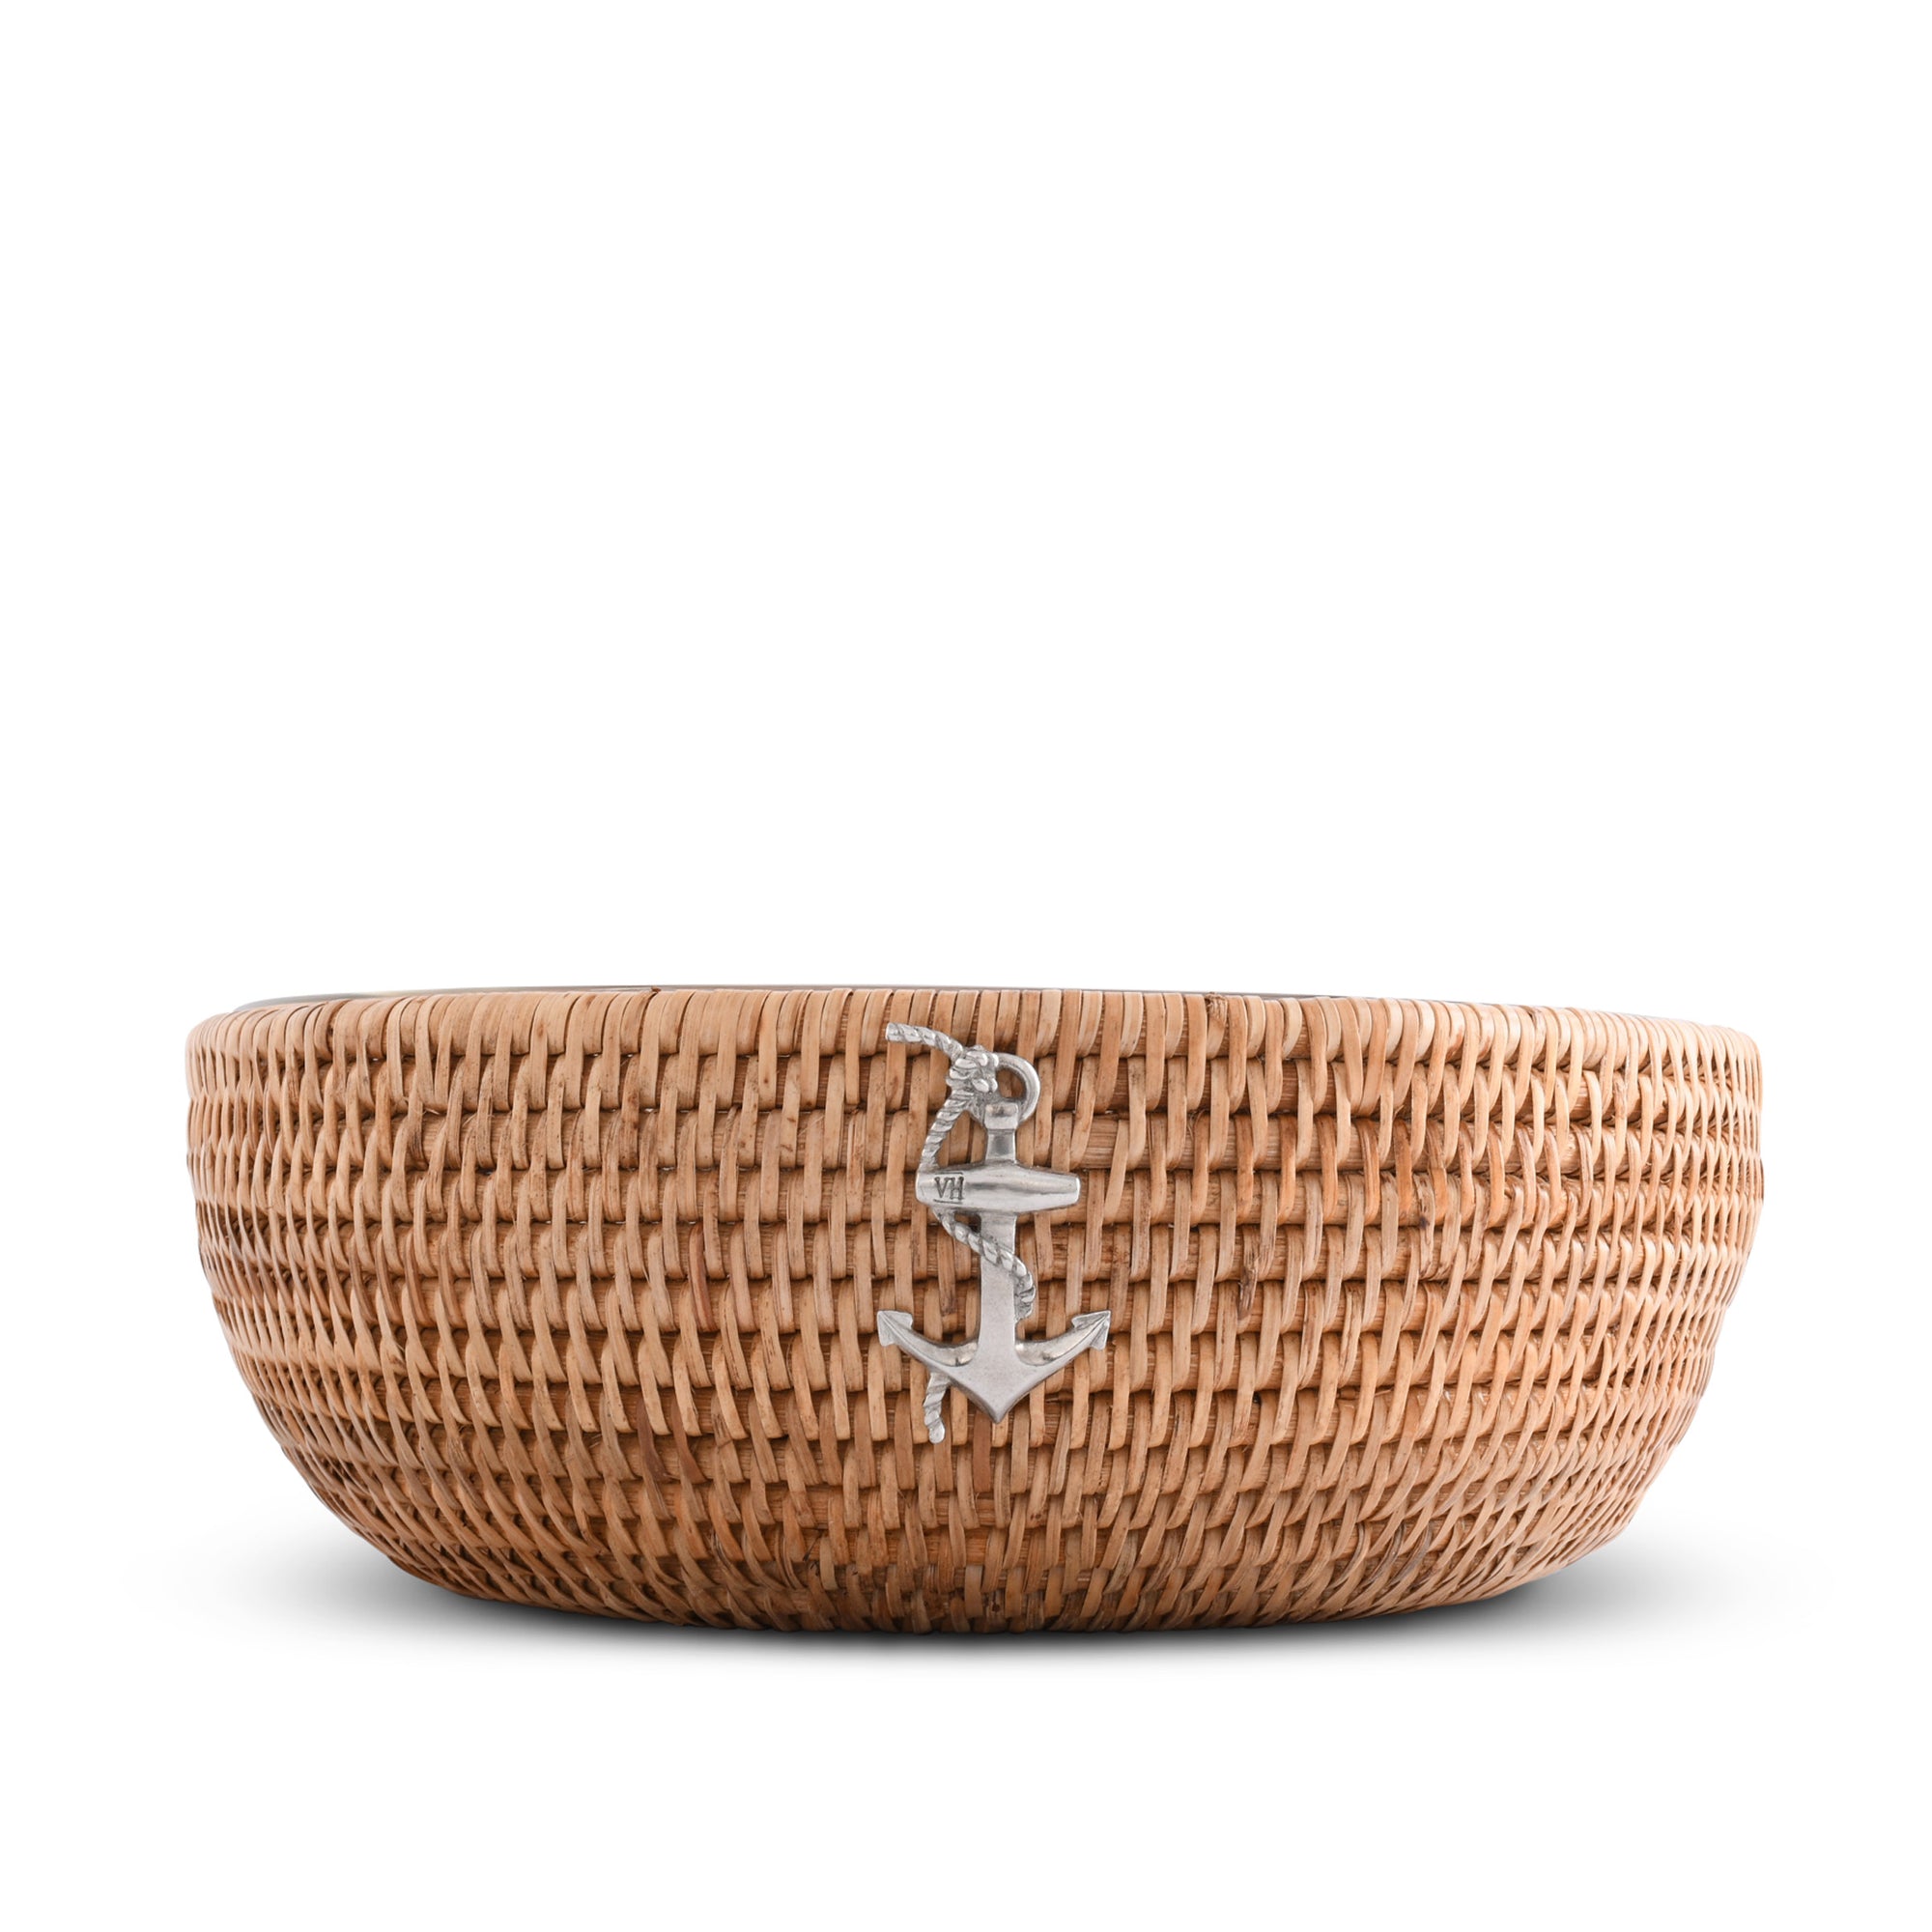 Vagabond House Anchor Hand Woven Wicker Natural Rattan Serving Bowl Product Image